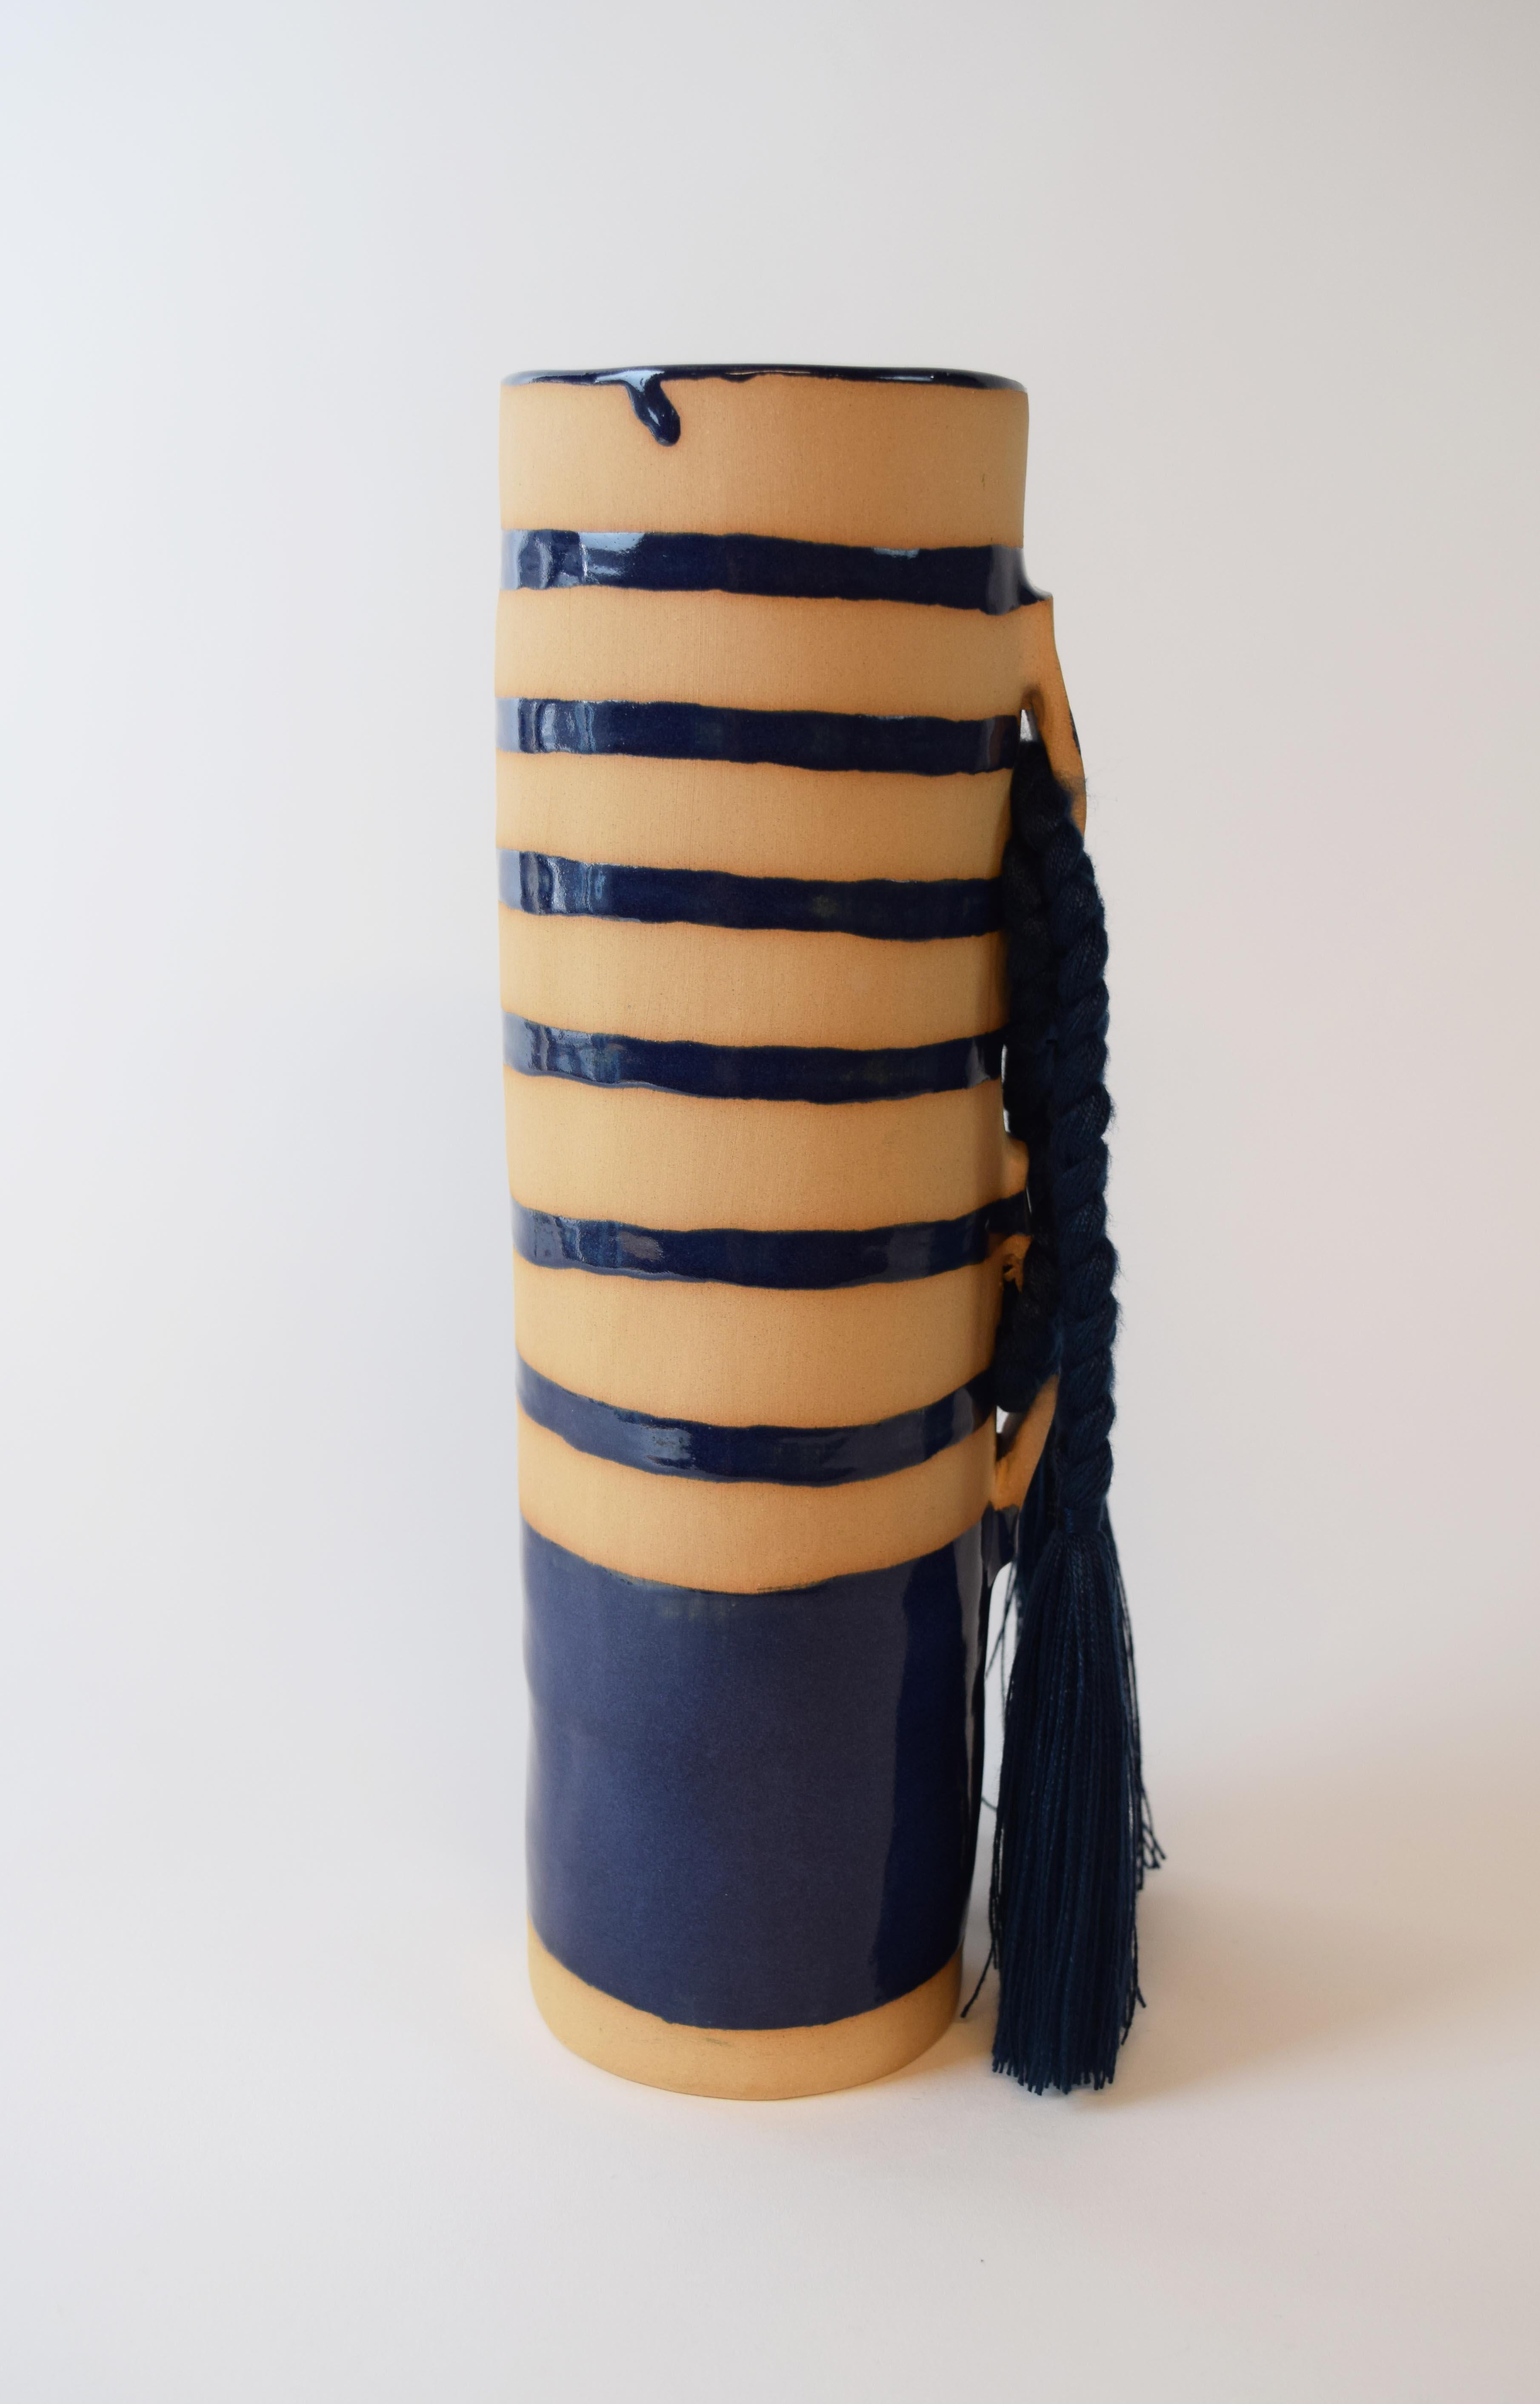 American Limited Edition Handmade Ceramic Vase #696, Blue Hand Painted Stripes with Braid